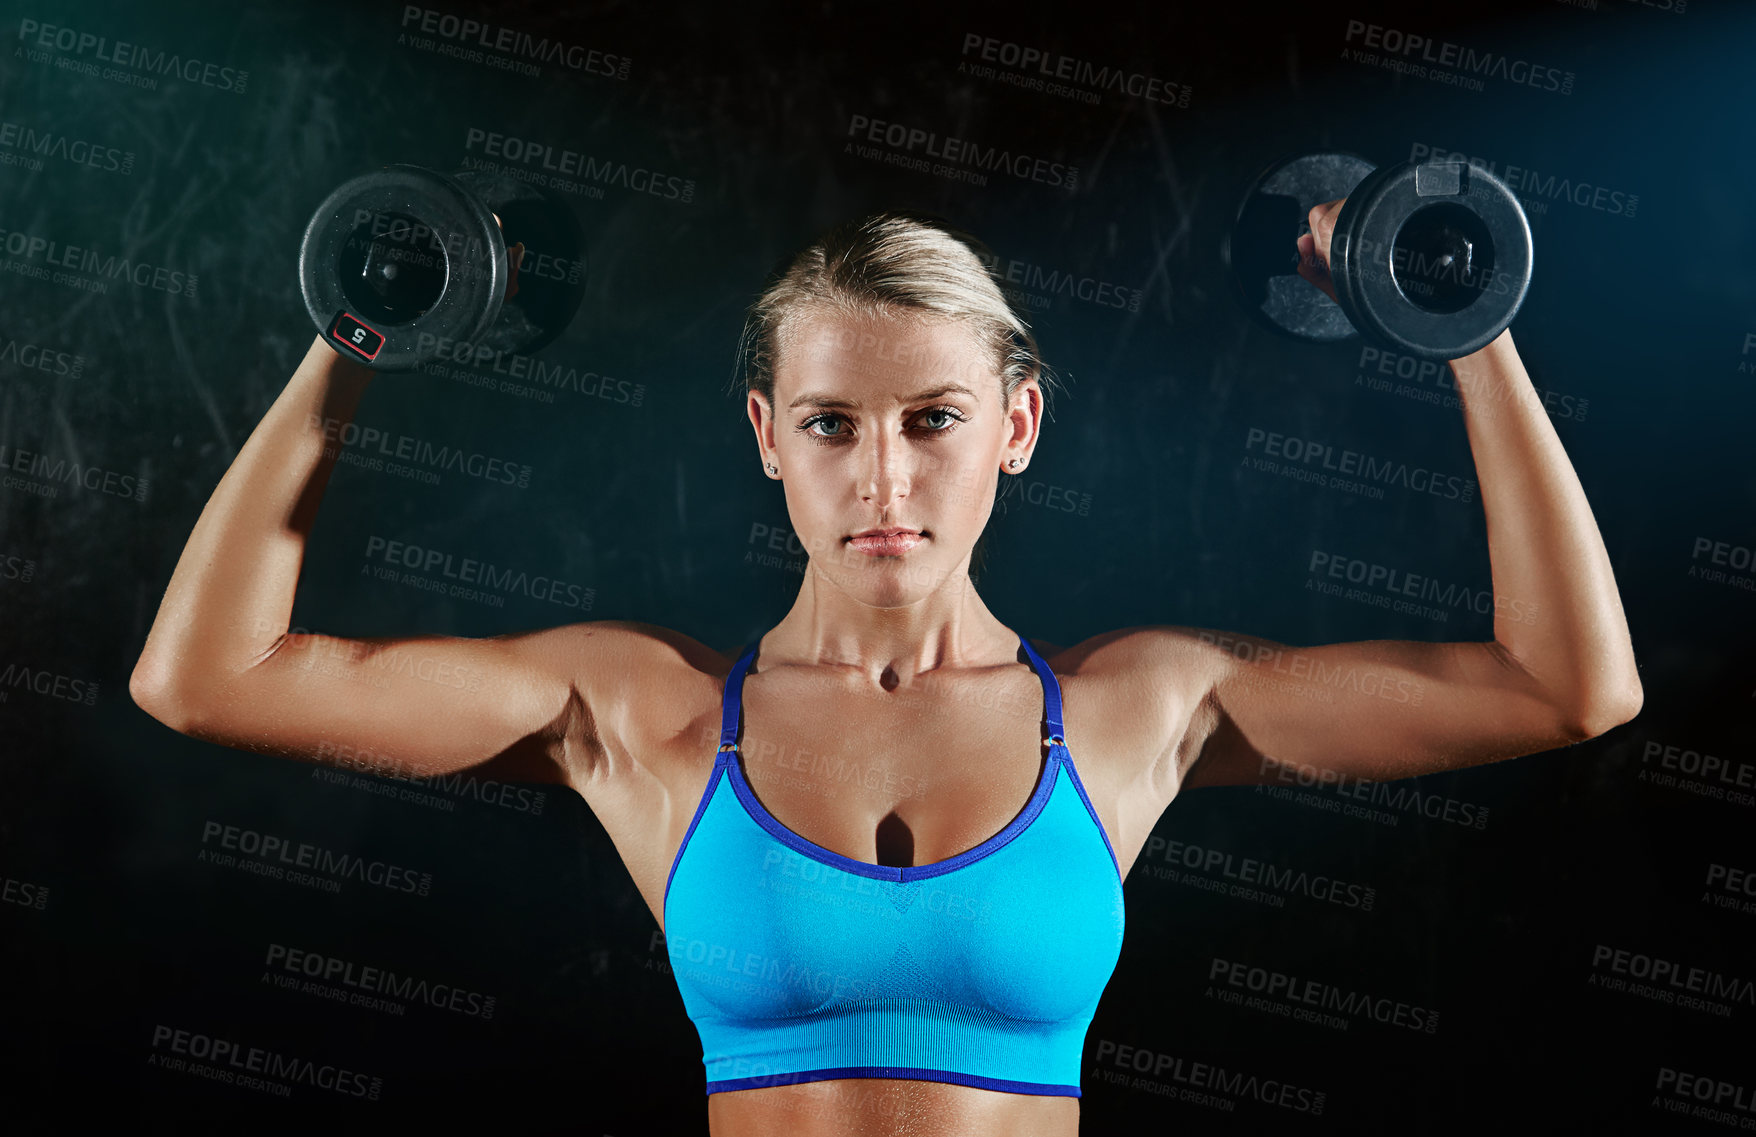 Buy stock photo Portrait of a young woman working out with weights